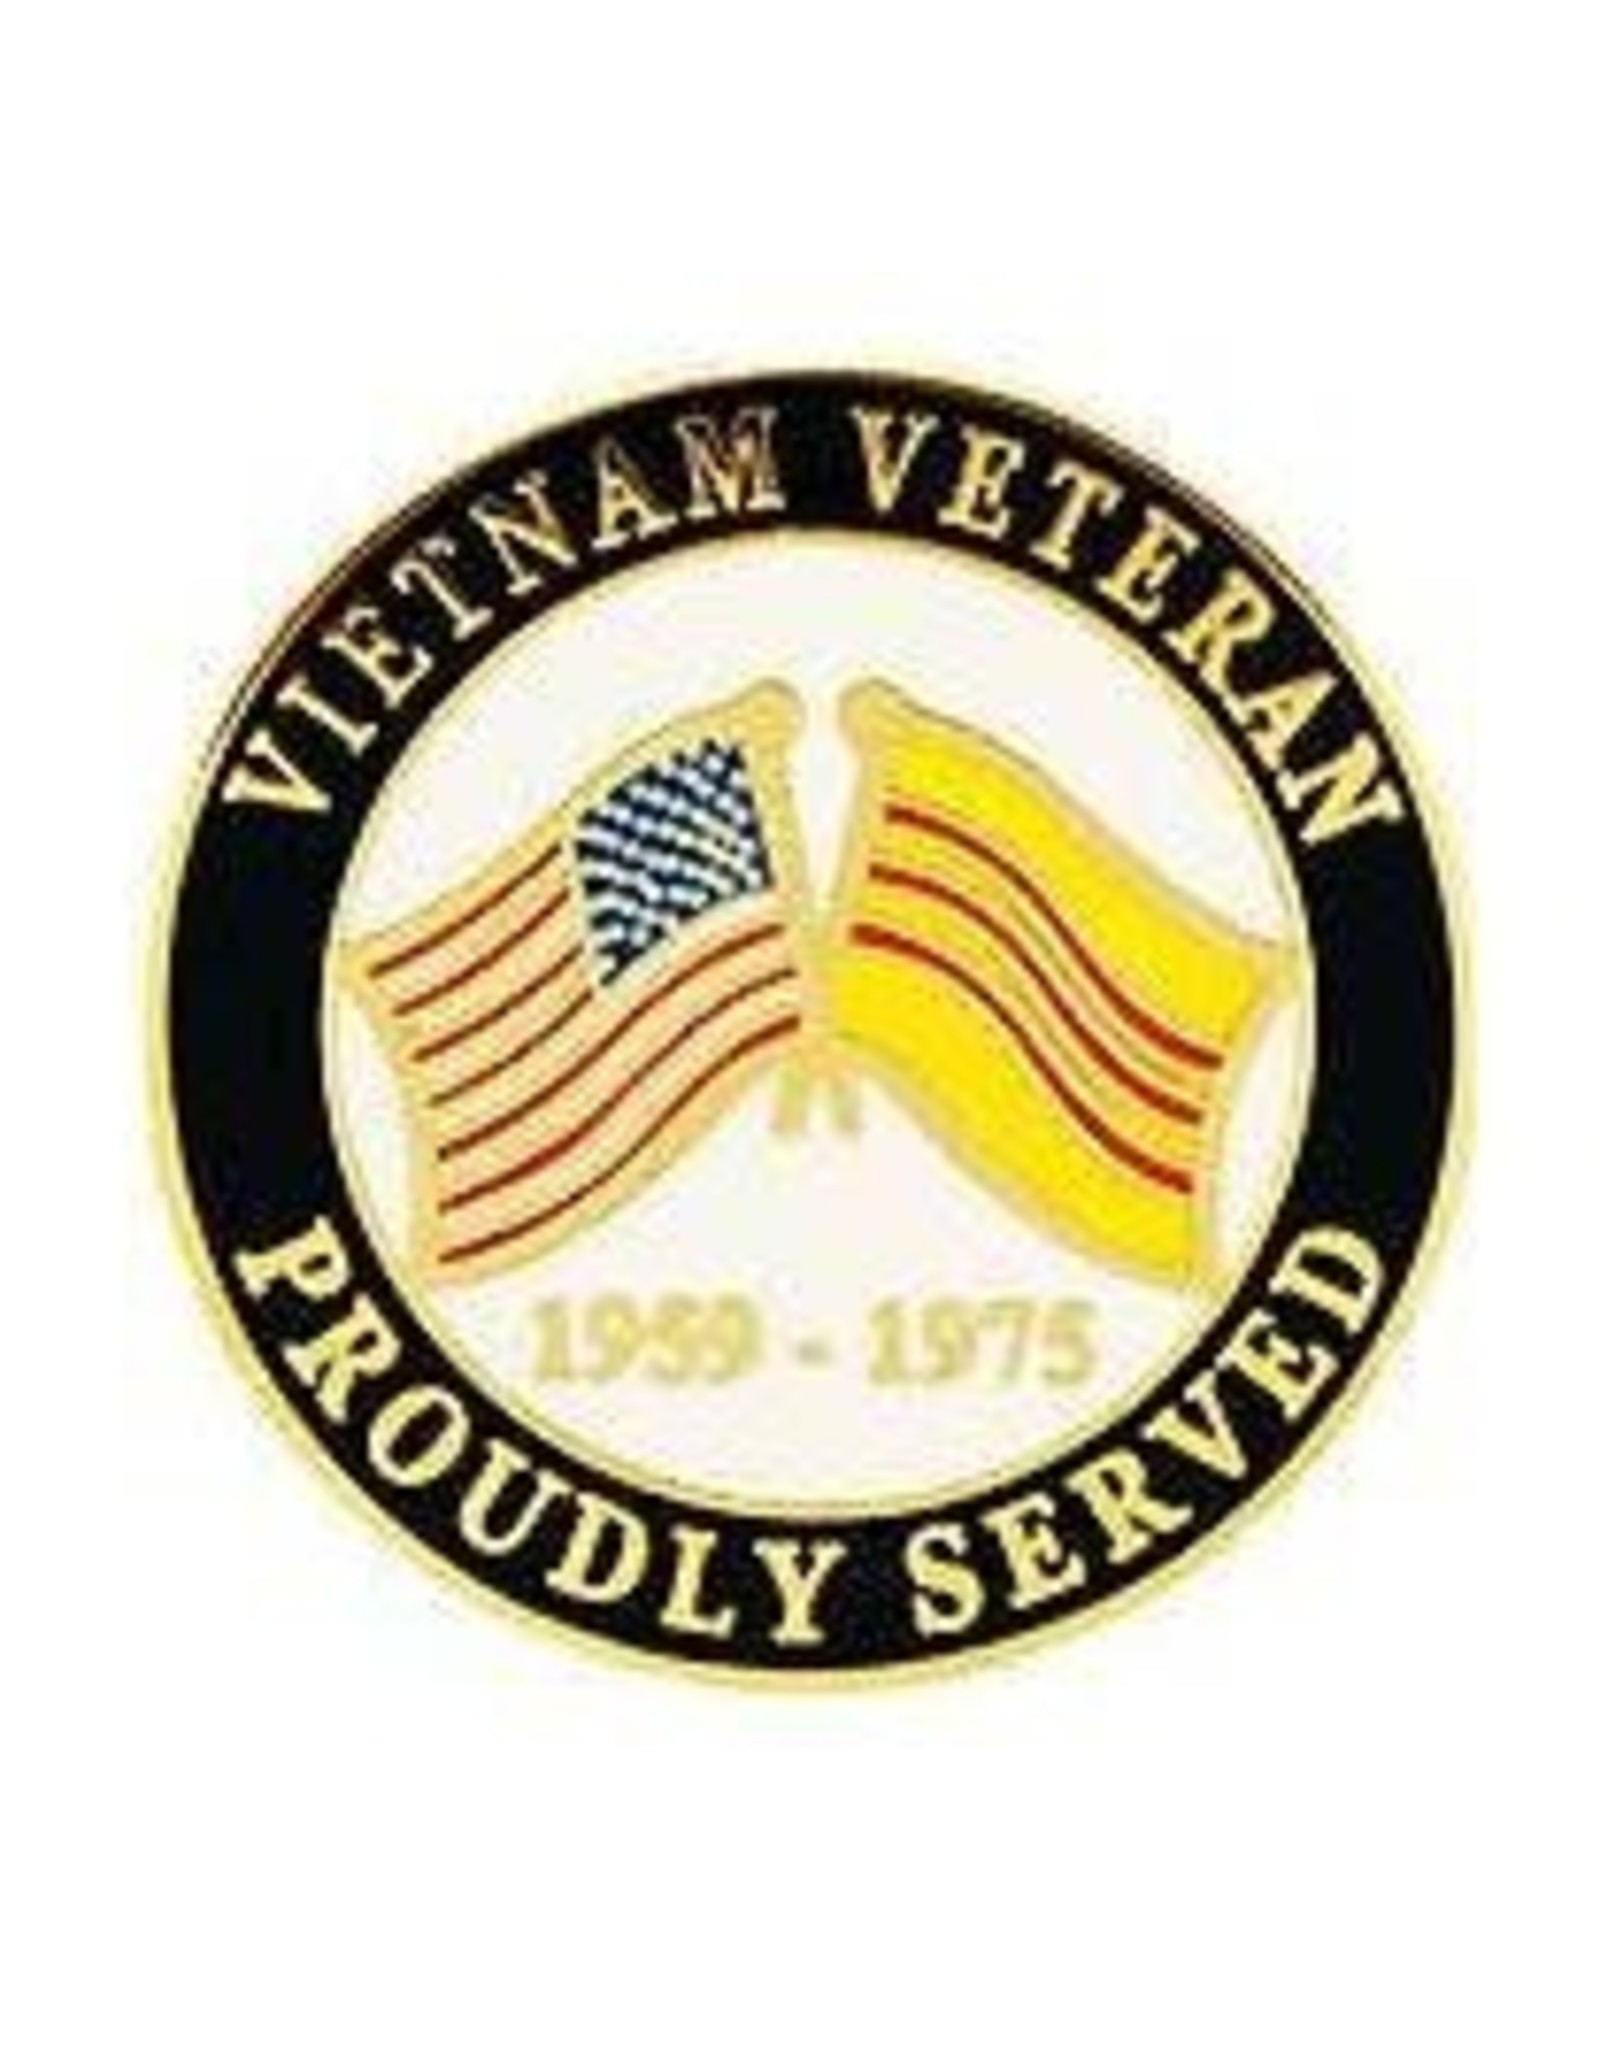 Pin - Vietnam Proudly Served